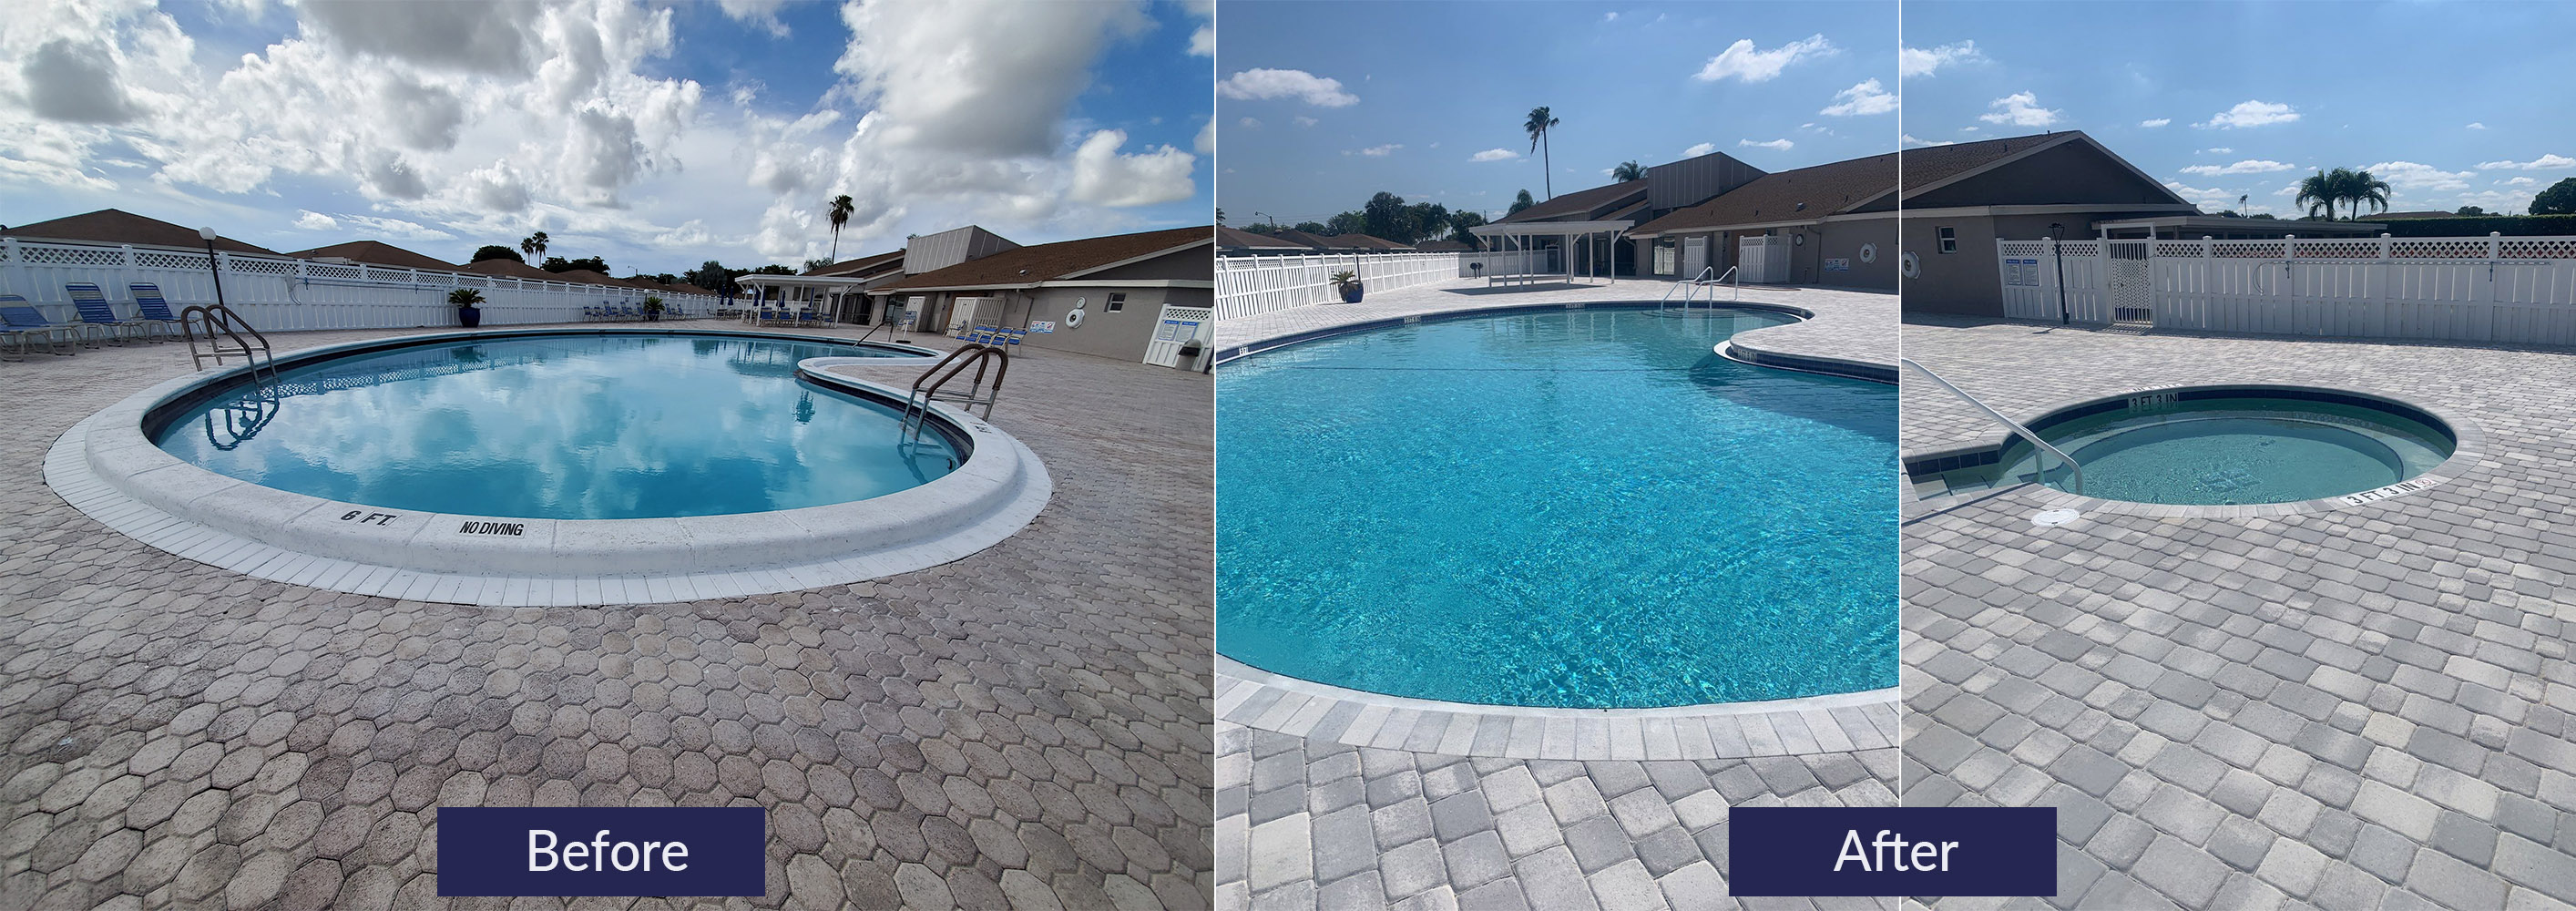 Commercial pool renovation